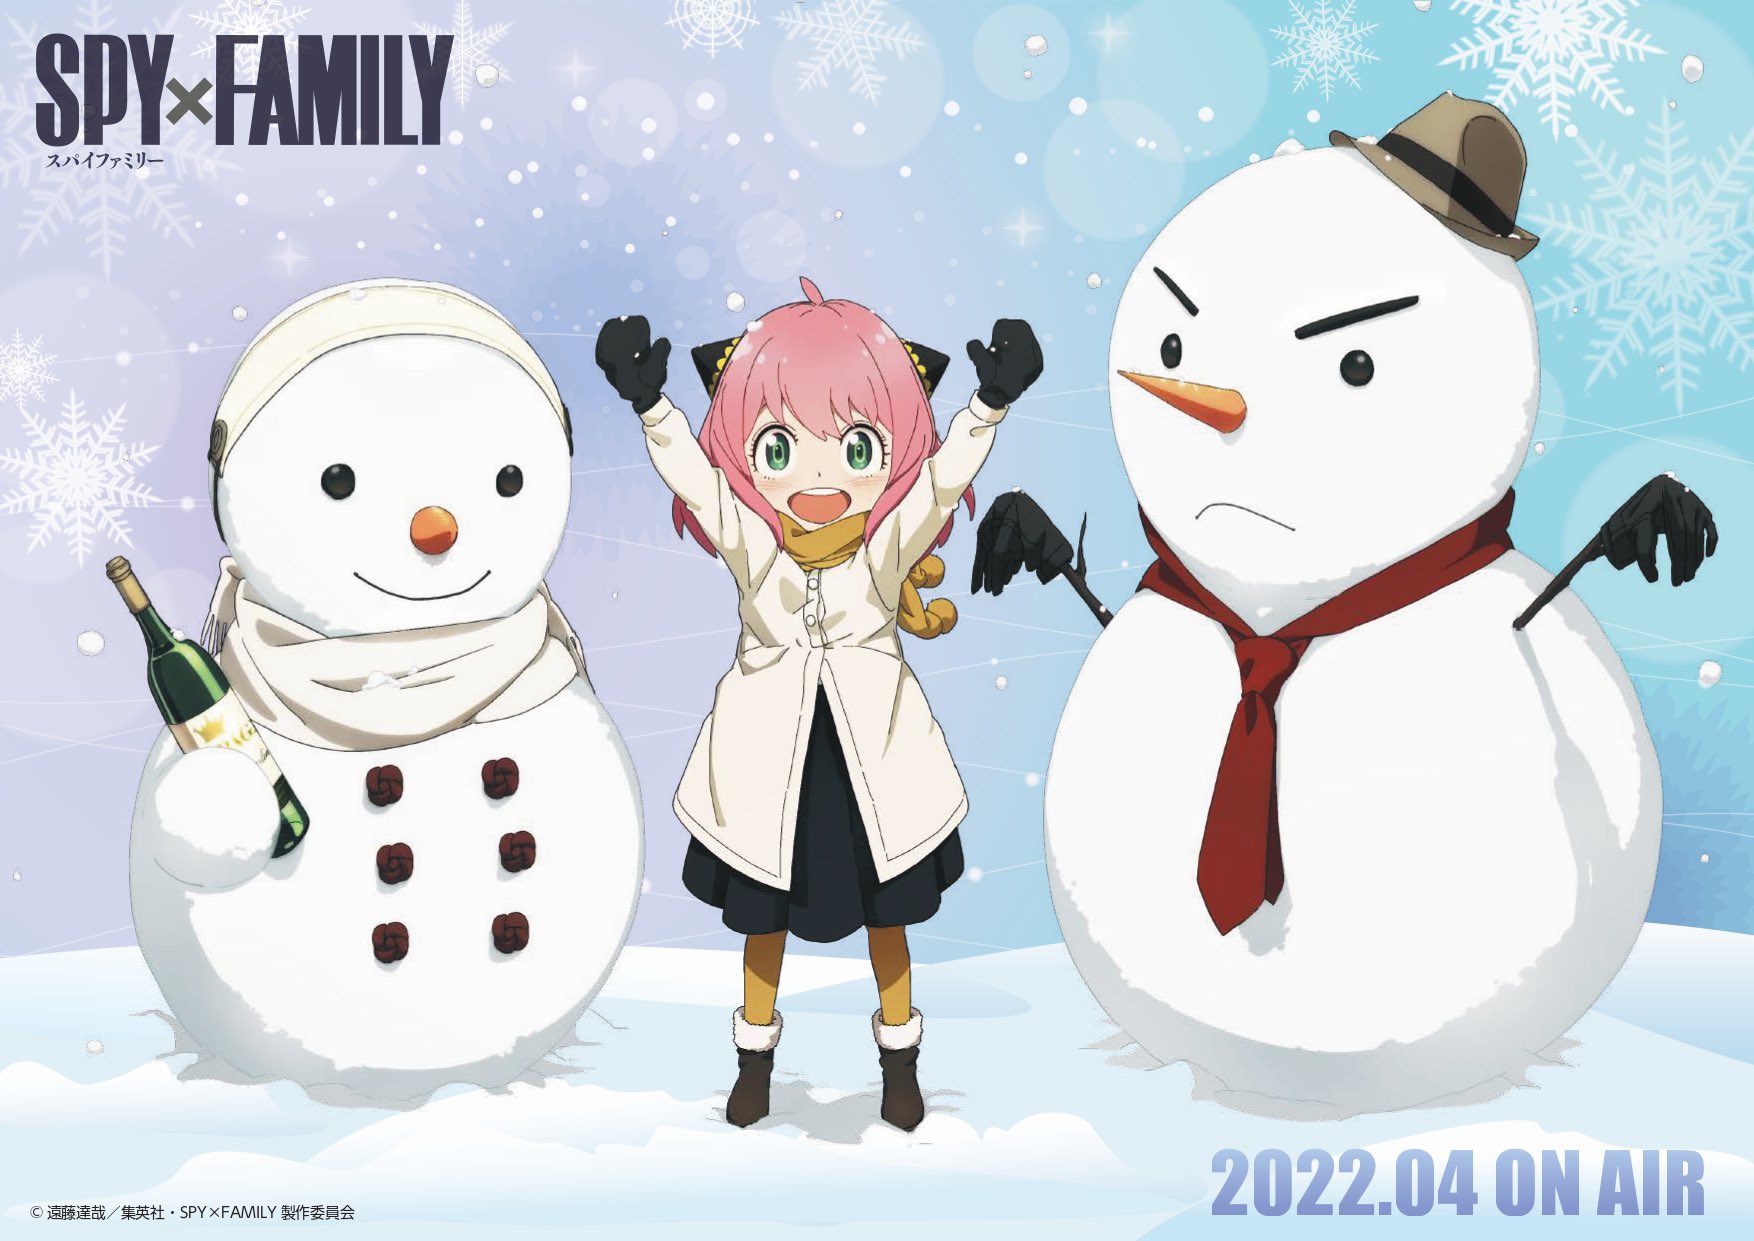 Crunchyroll - SPY x FAMILY Anime Wishes Everyone Happy Holidays in Adorable  Snowy Illustration